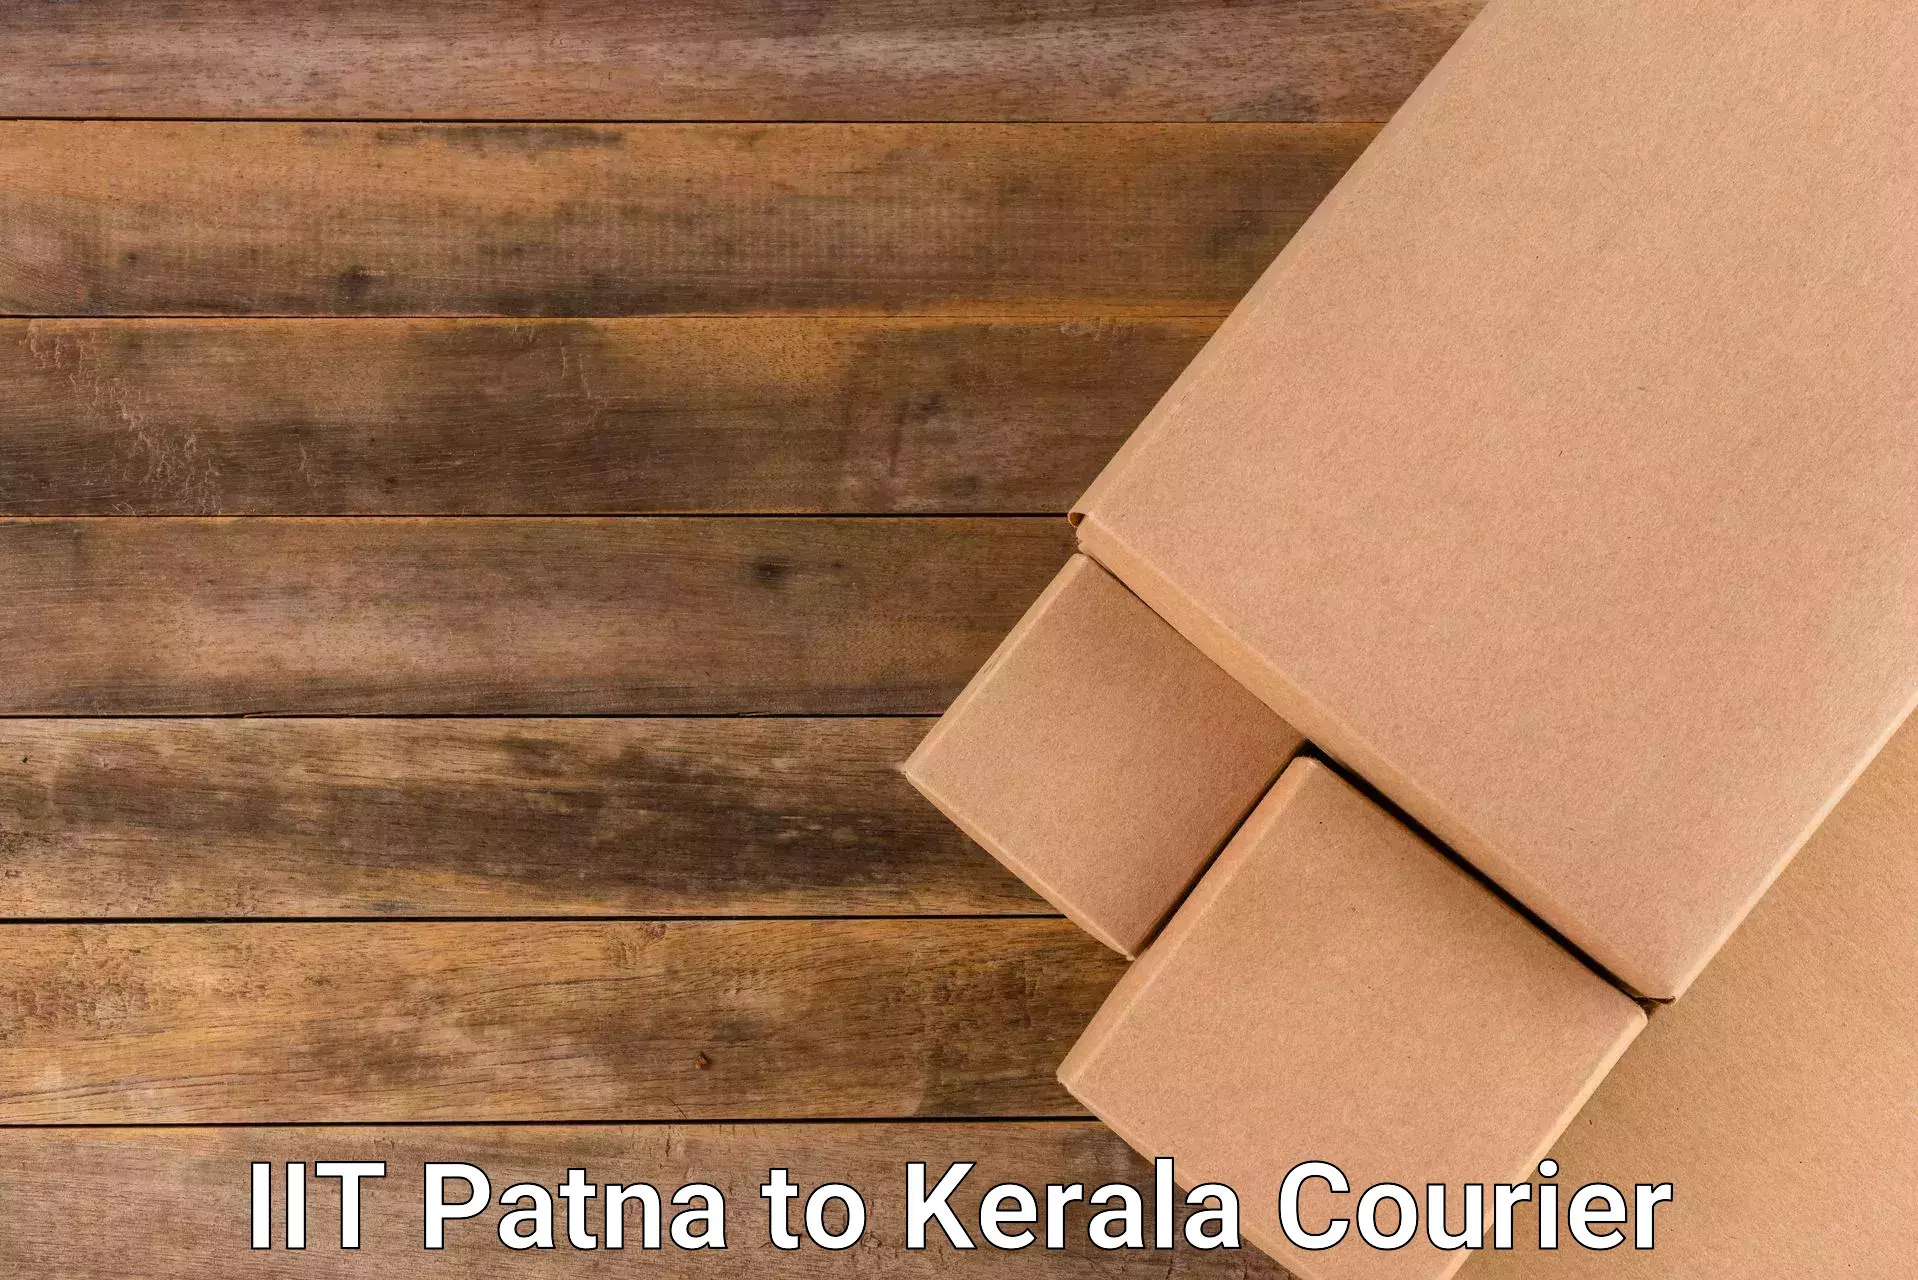 Next-day delivery options IIT Patna to Ernakulam